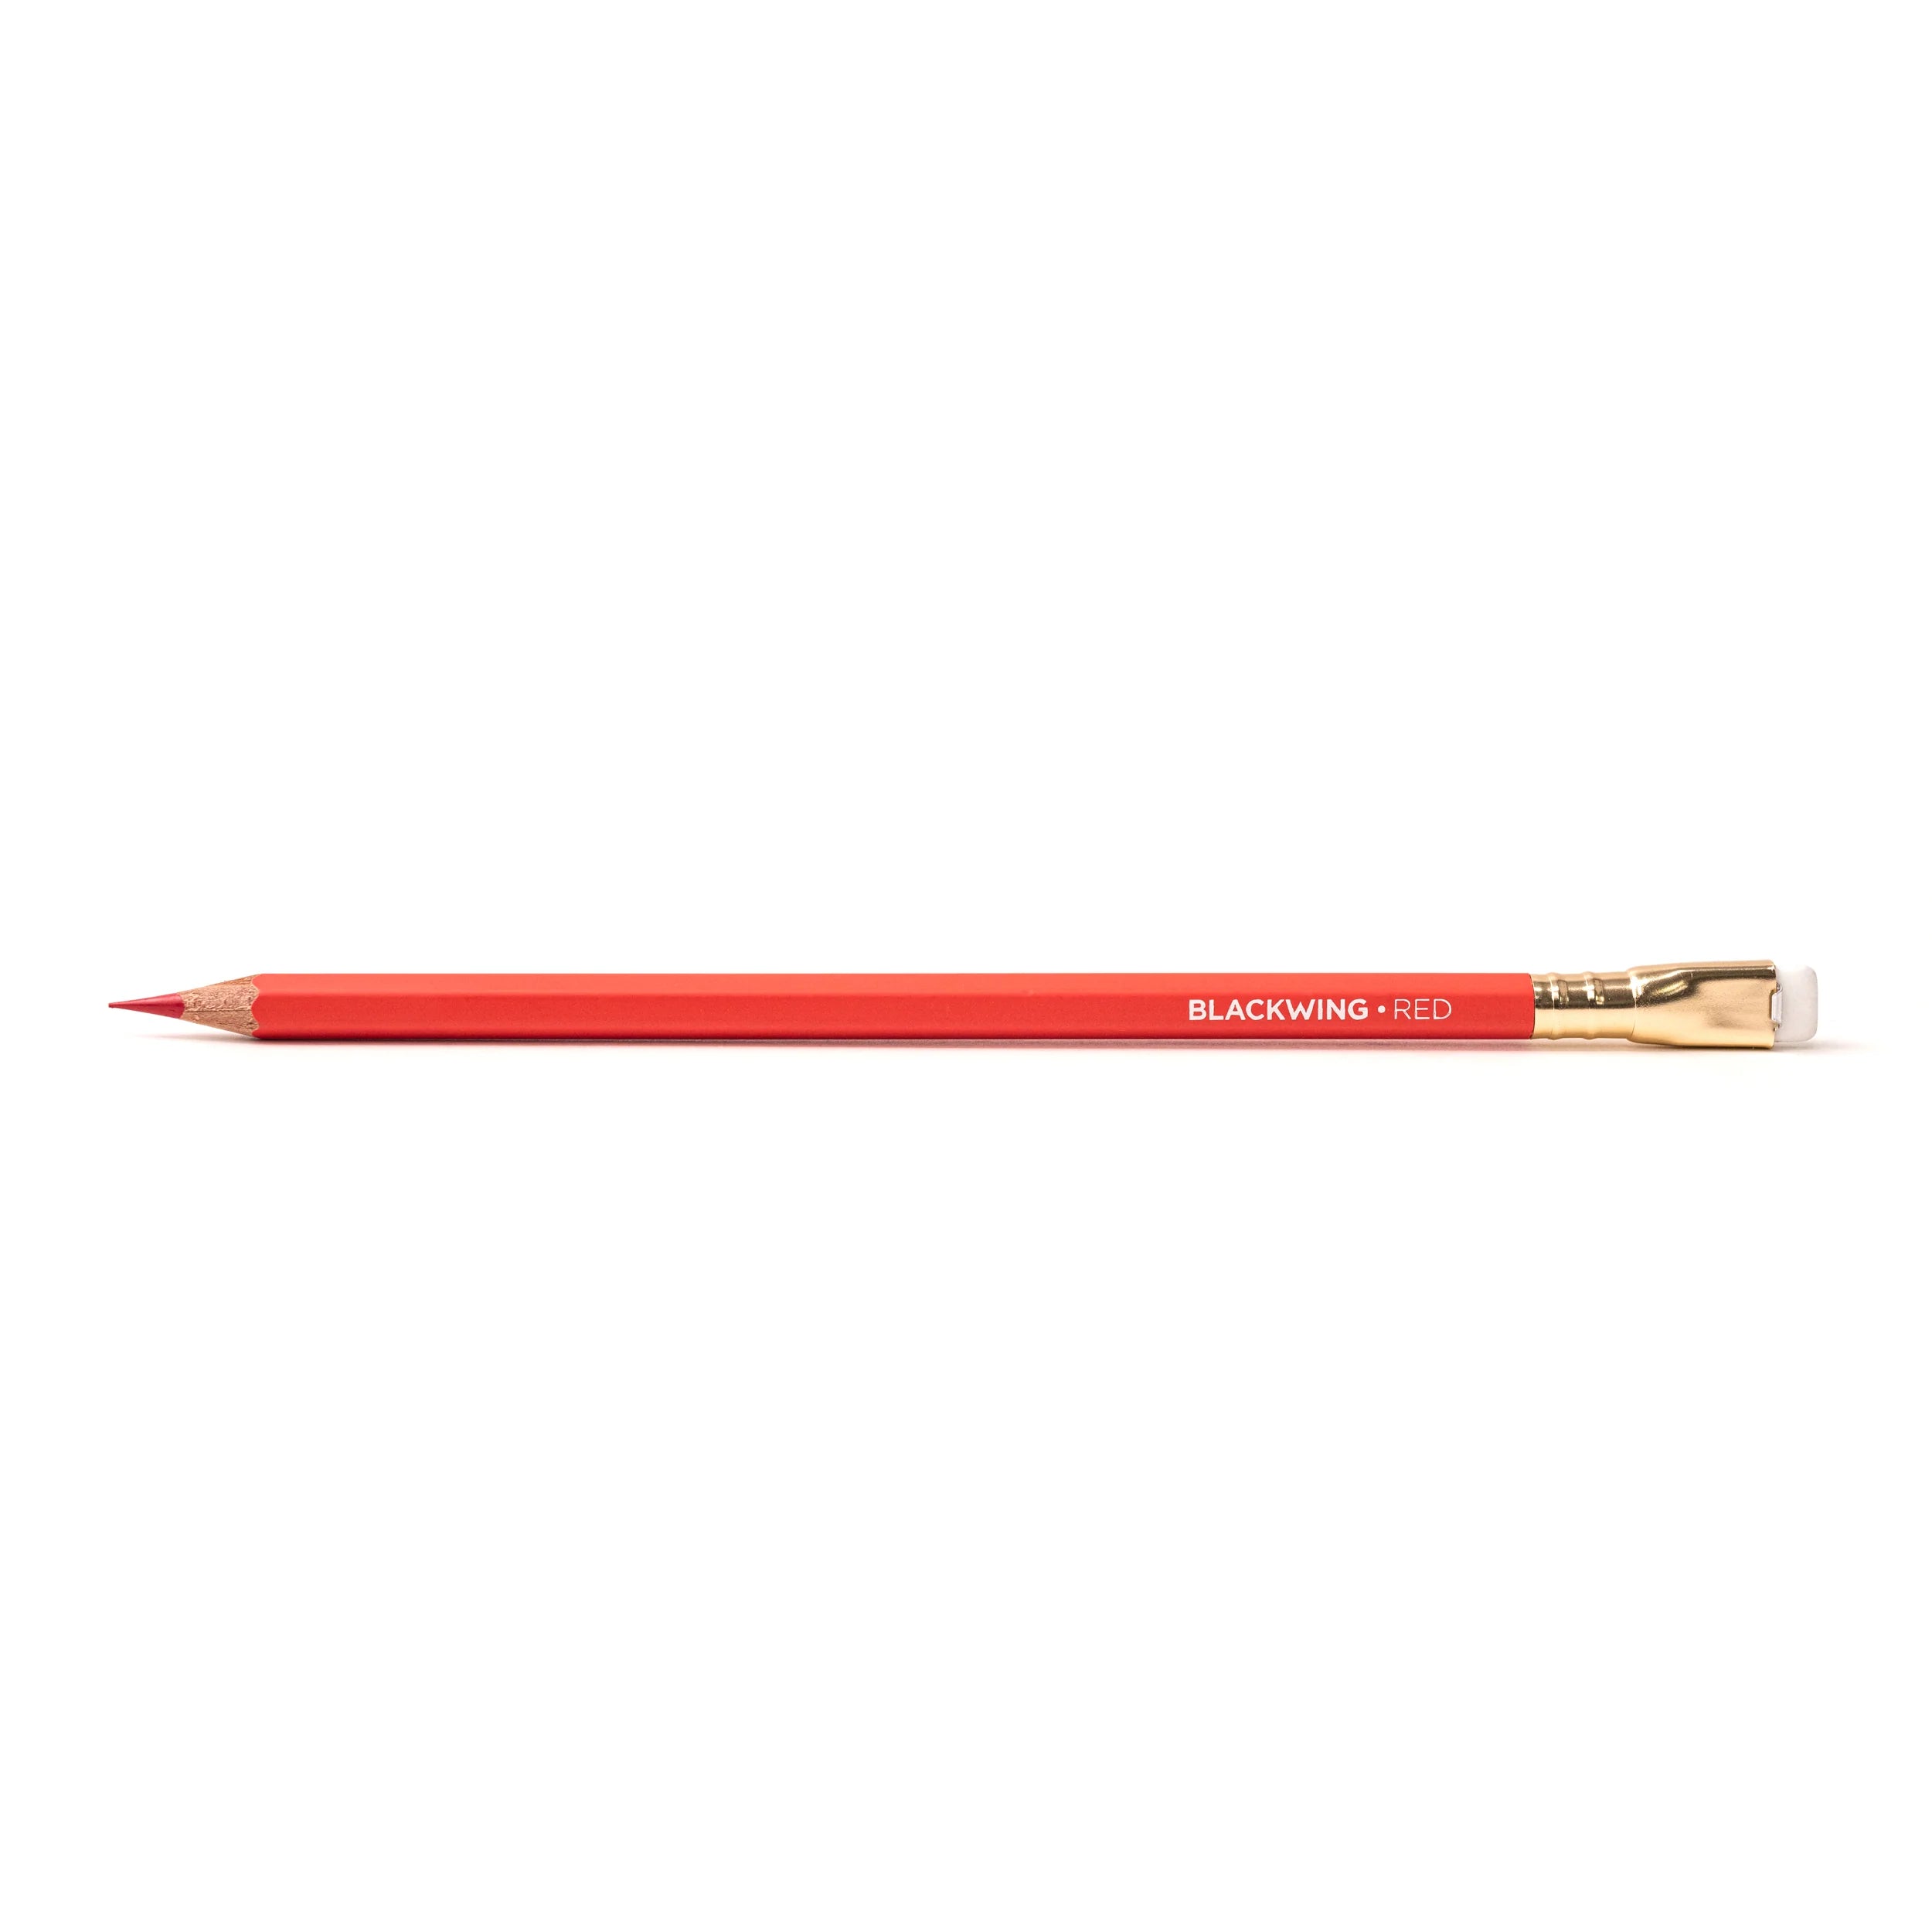 Blackwing Red [4 pencils]